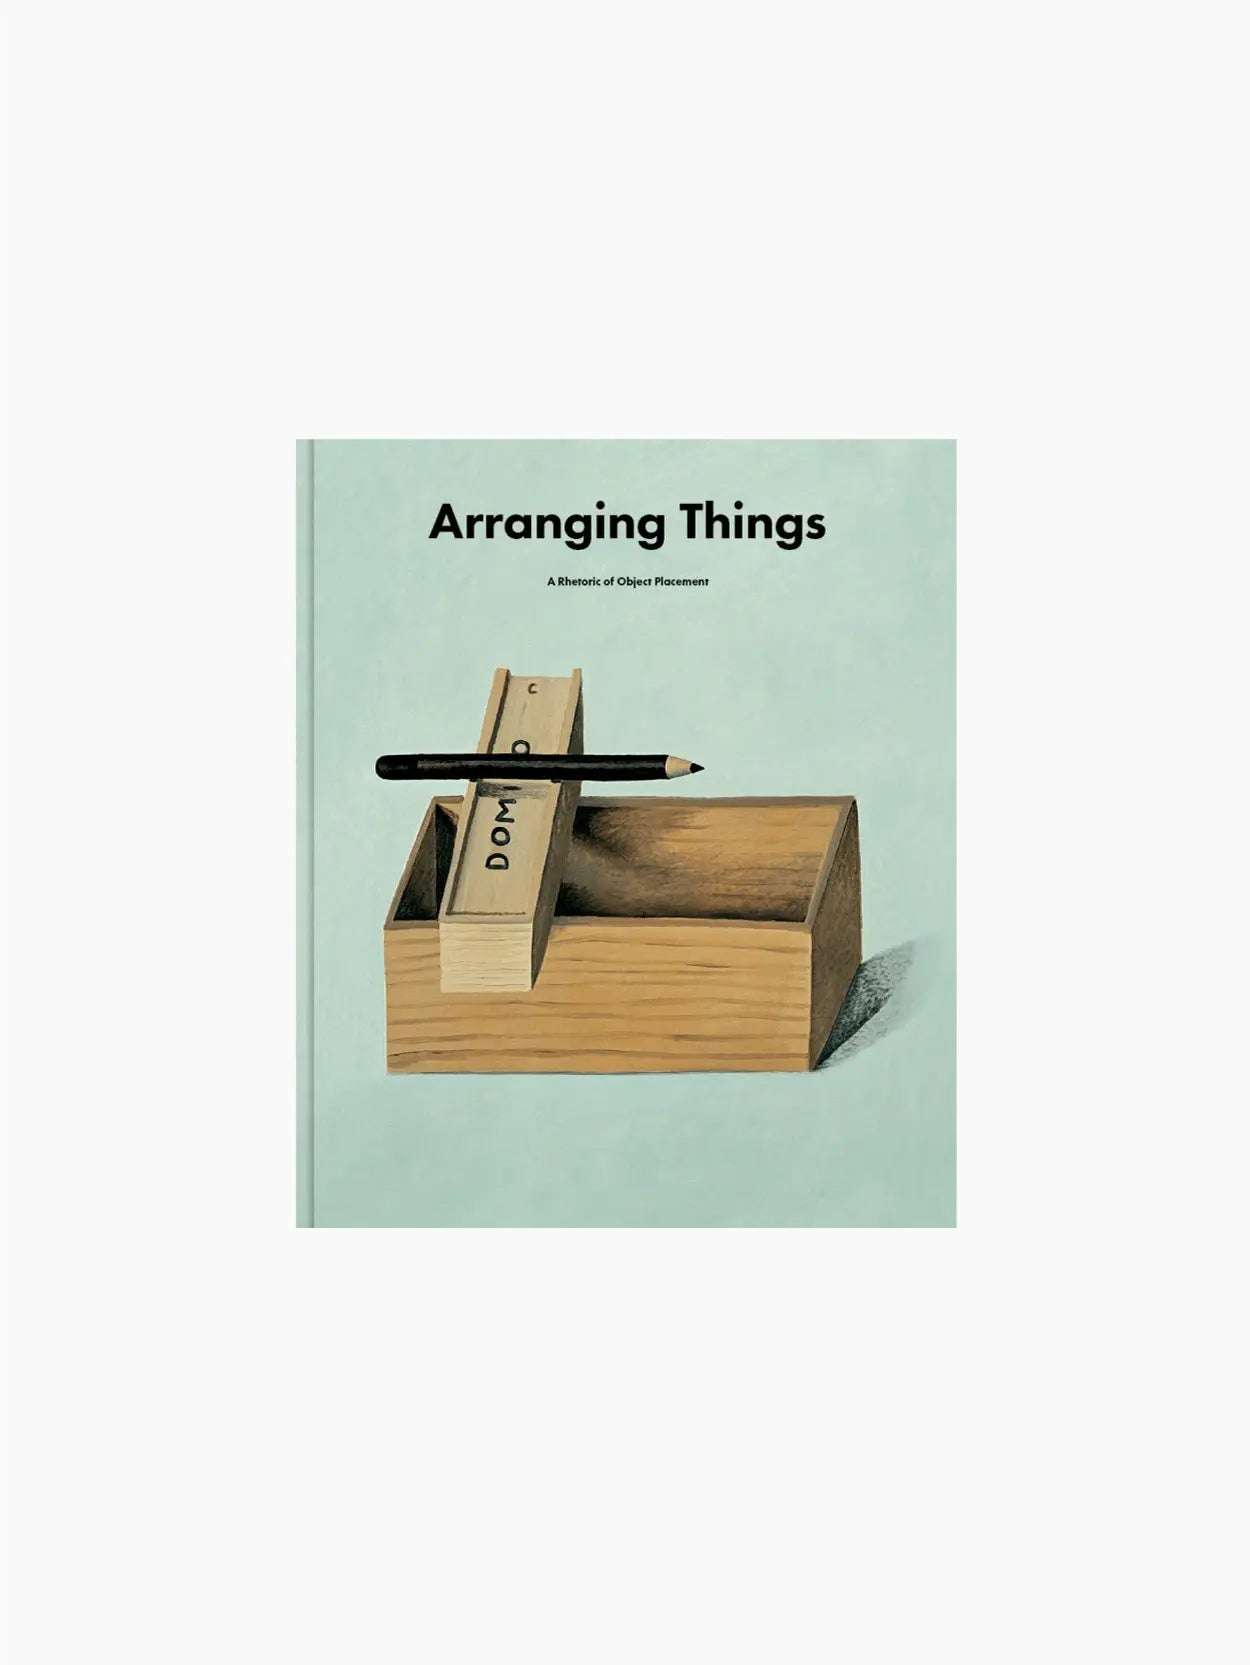 Book cover of "Arranging Things: A Rhetoric of Object Placement" by Apartamento. The cover features a wooden block partially inside a wooden box with additional blocks stacked above it. A pencil rests on top, and the background is a light pastel blue, reminiscent of a stylish Barcelona store display.